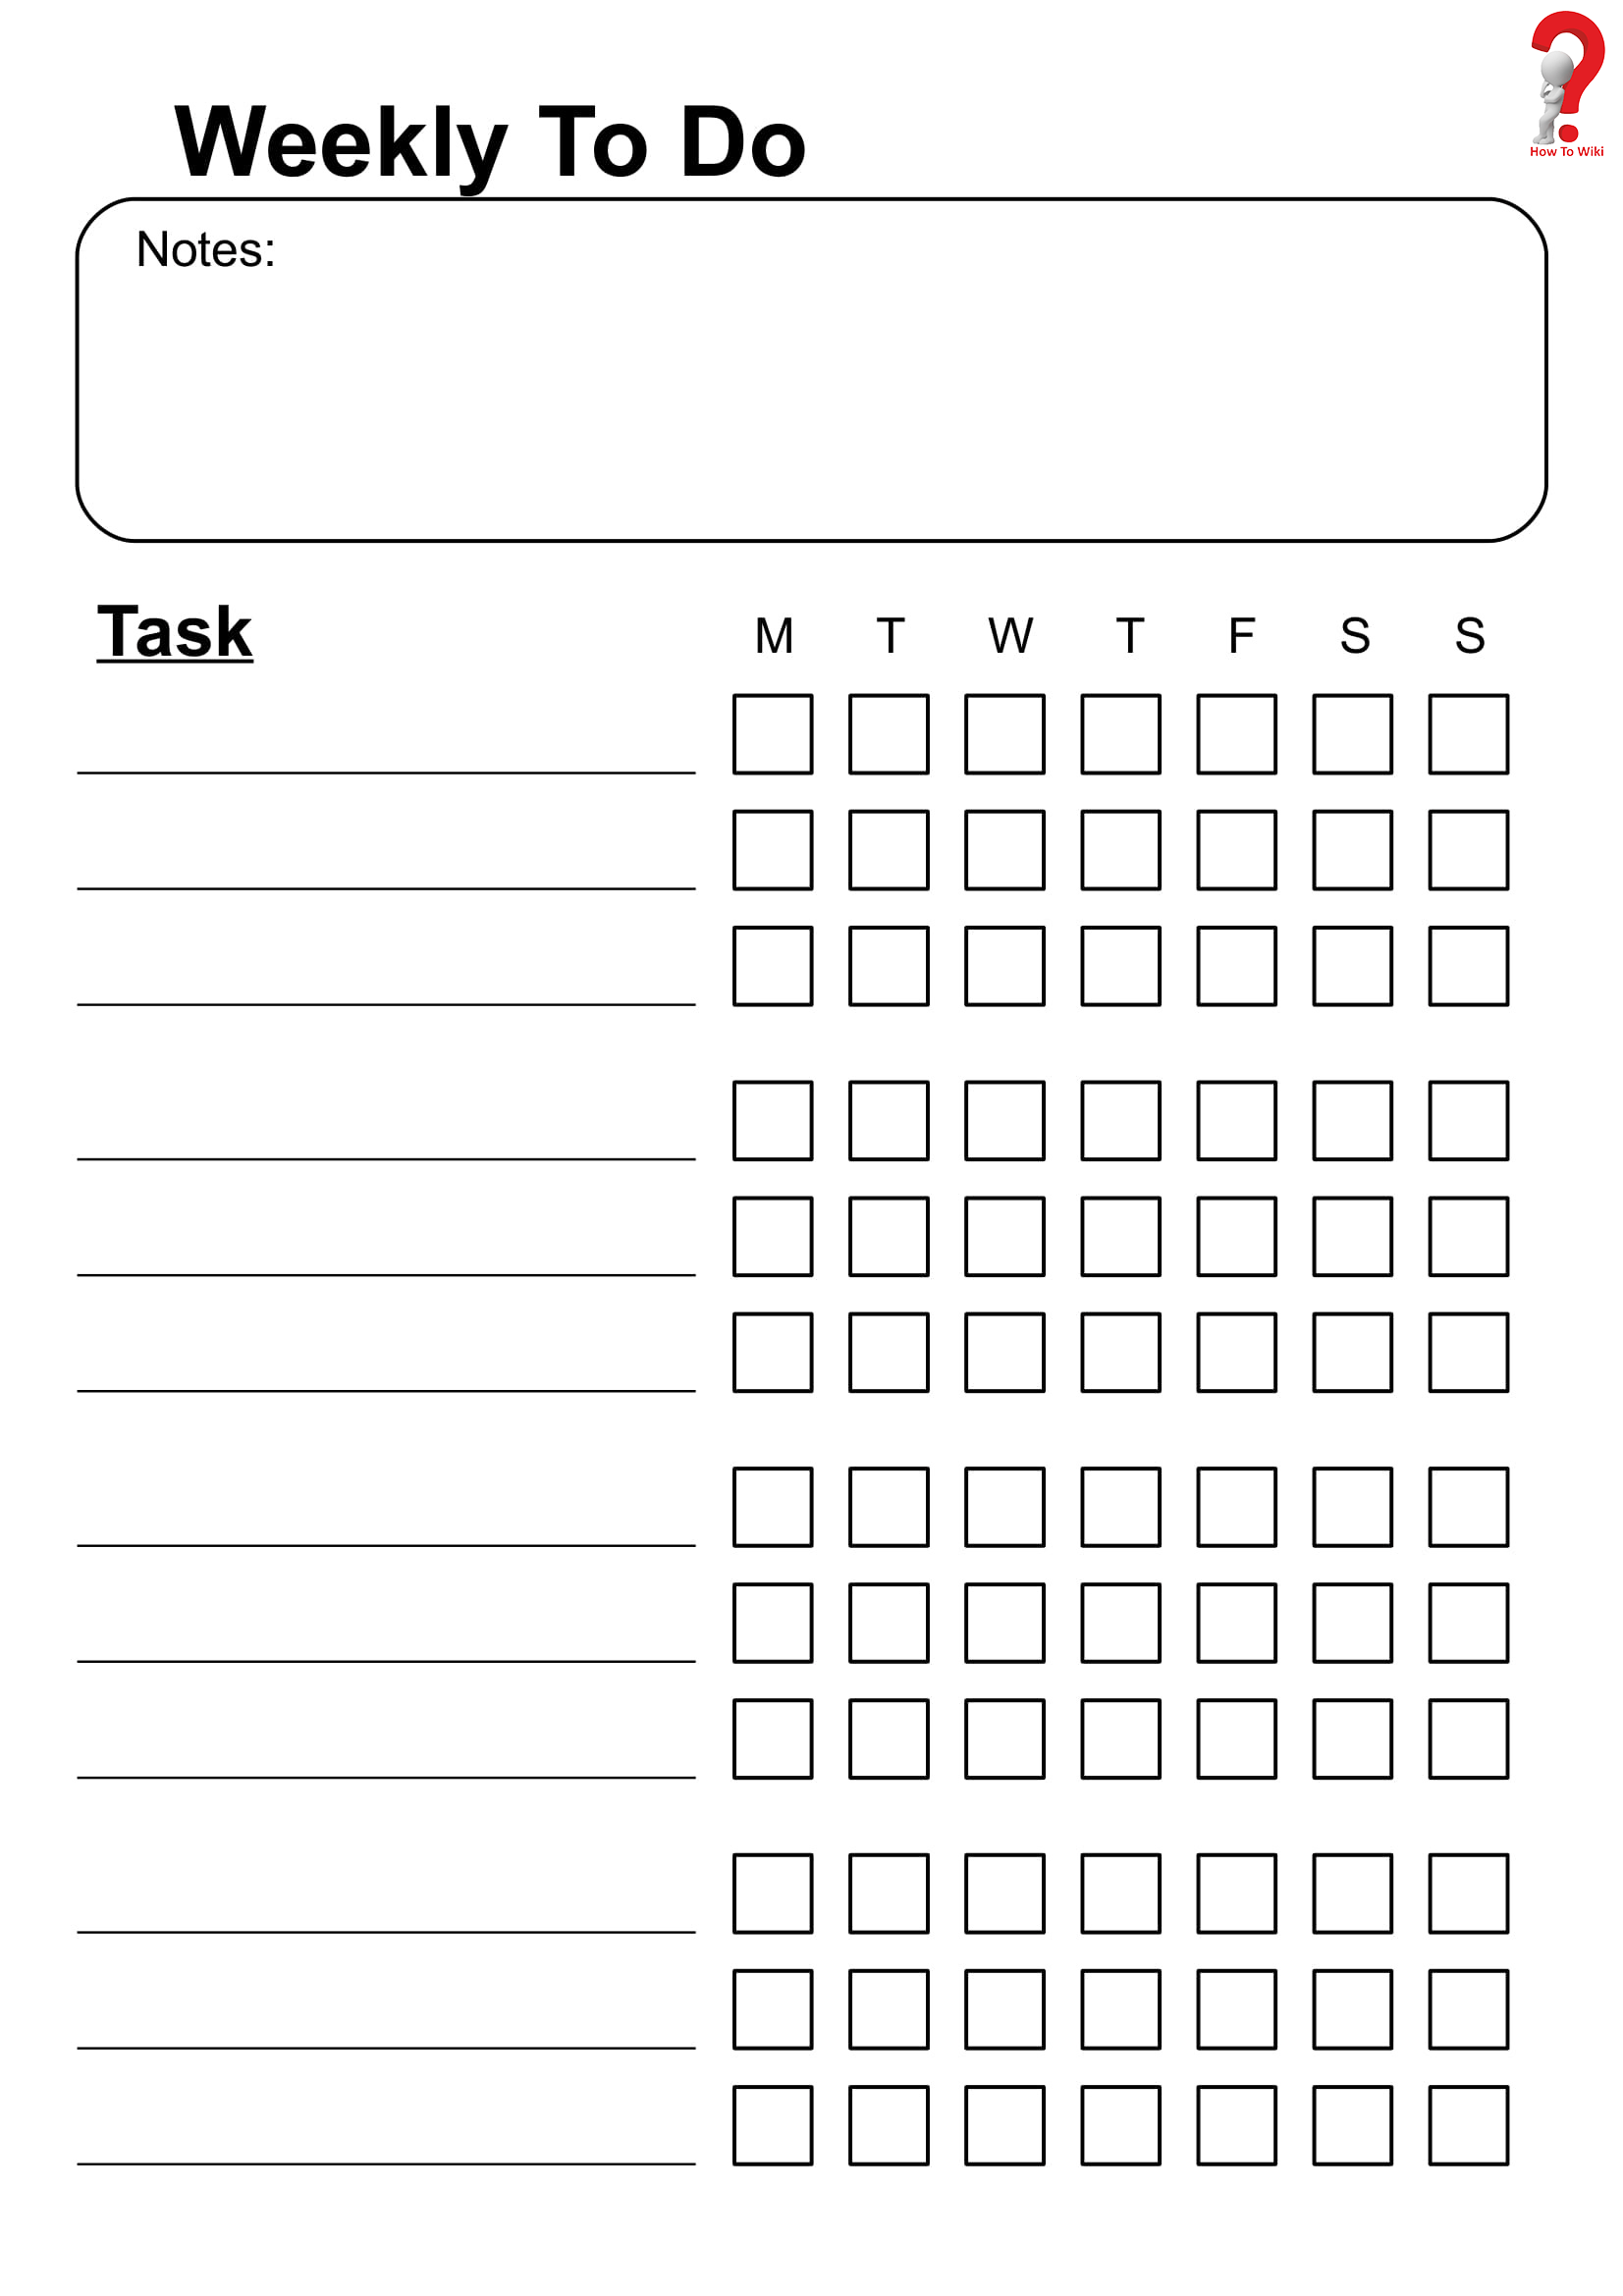 chedule Your Week With Weekly To Do List Template